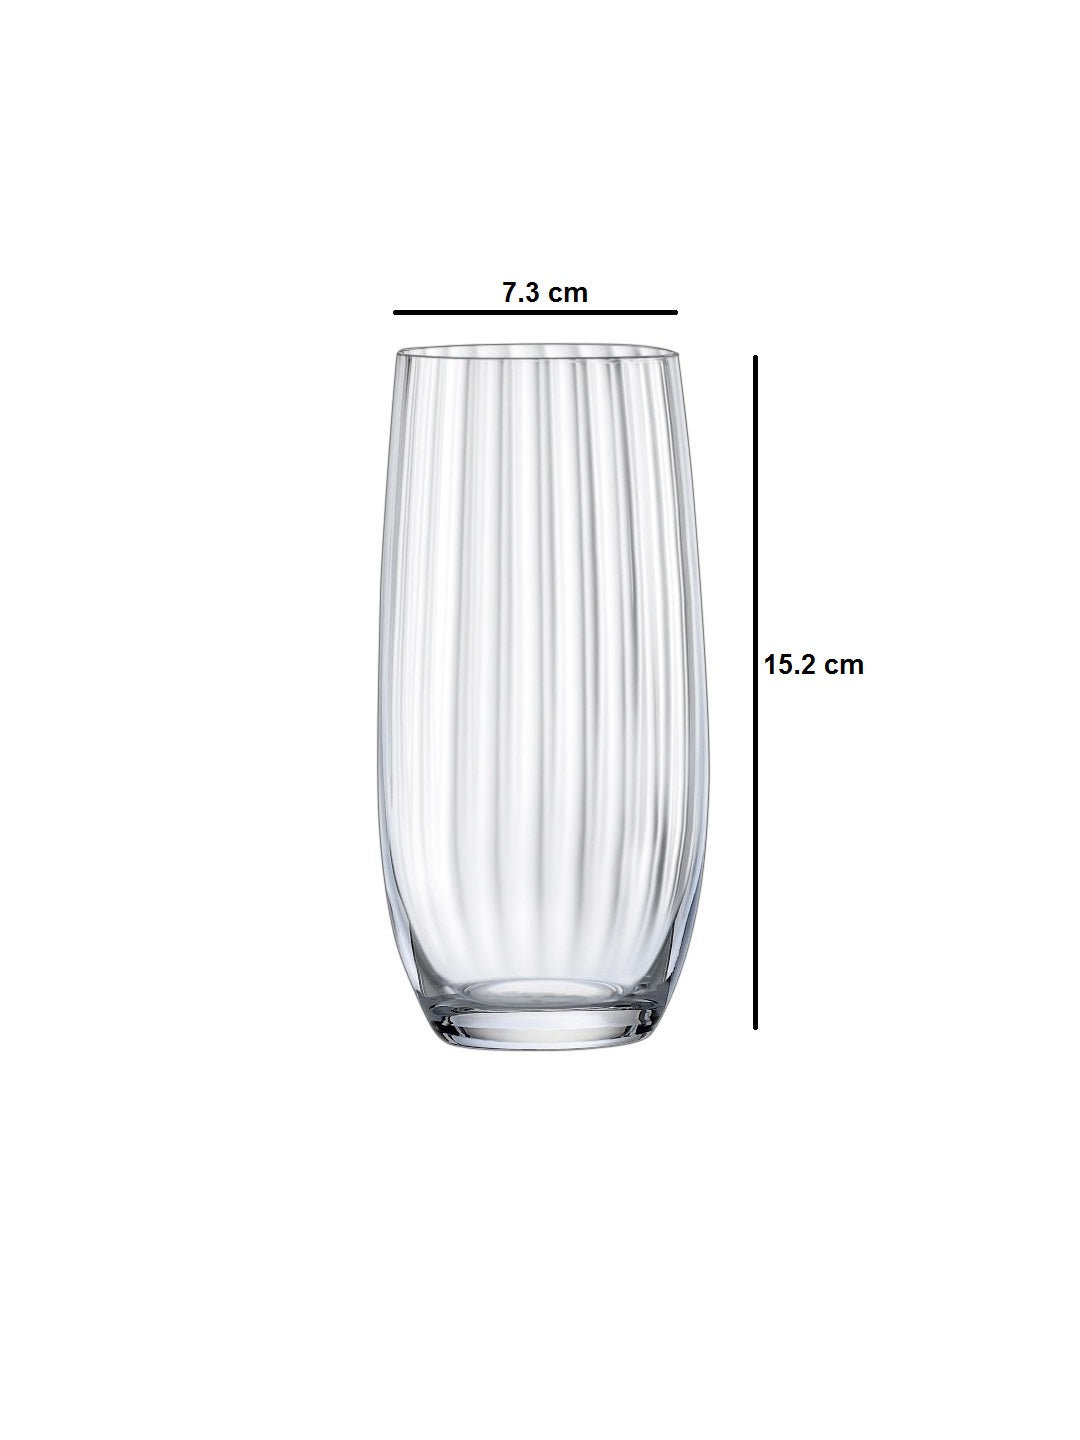 Dimensions of Sophisticated Glass Set - Elevate your drink service with premium-quality glassware.